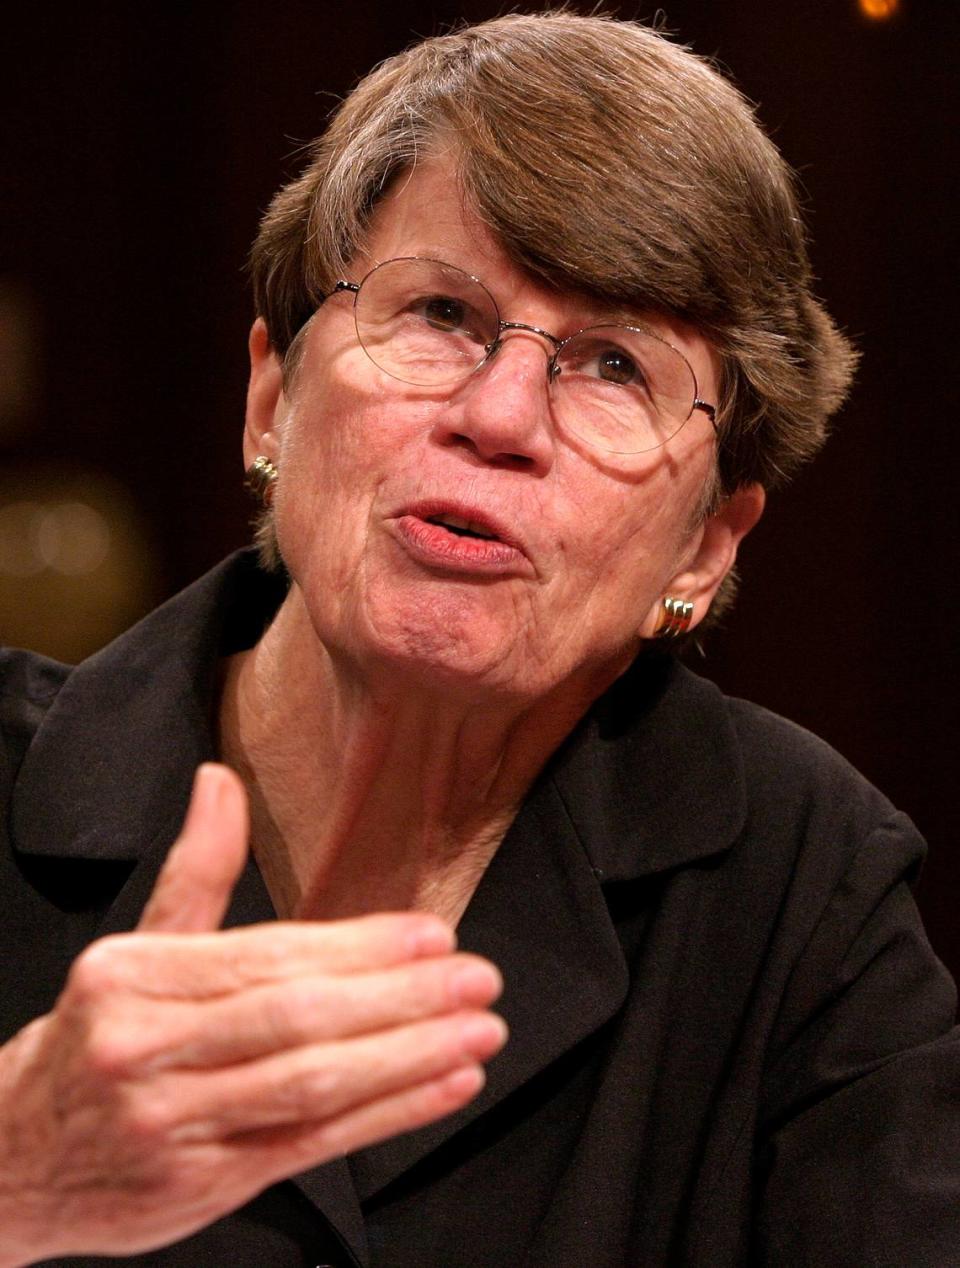 Former Attorney General Janet Reno testifies before the 9/11 commission Tuesday, April 13 2004 in Washington, D.C. Reno, the first woman to serve as attorney general, died after a years-long struggle with Parkinsons’s disease. She was 78. (Chuck Kennedy/TNS) 